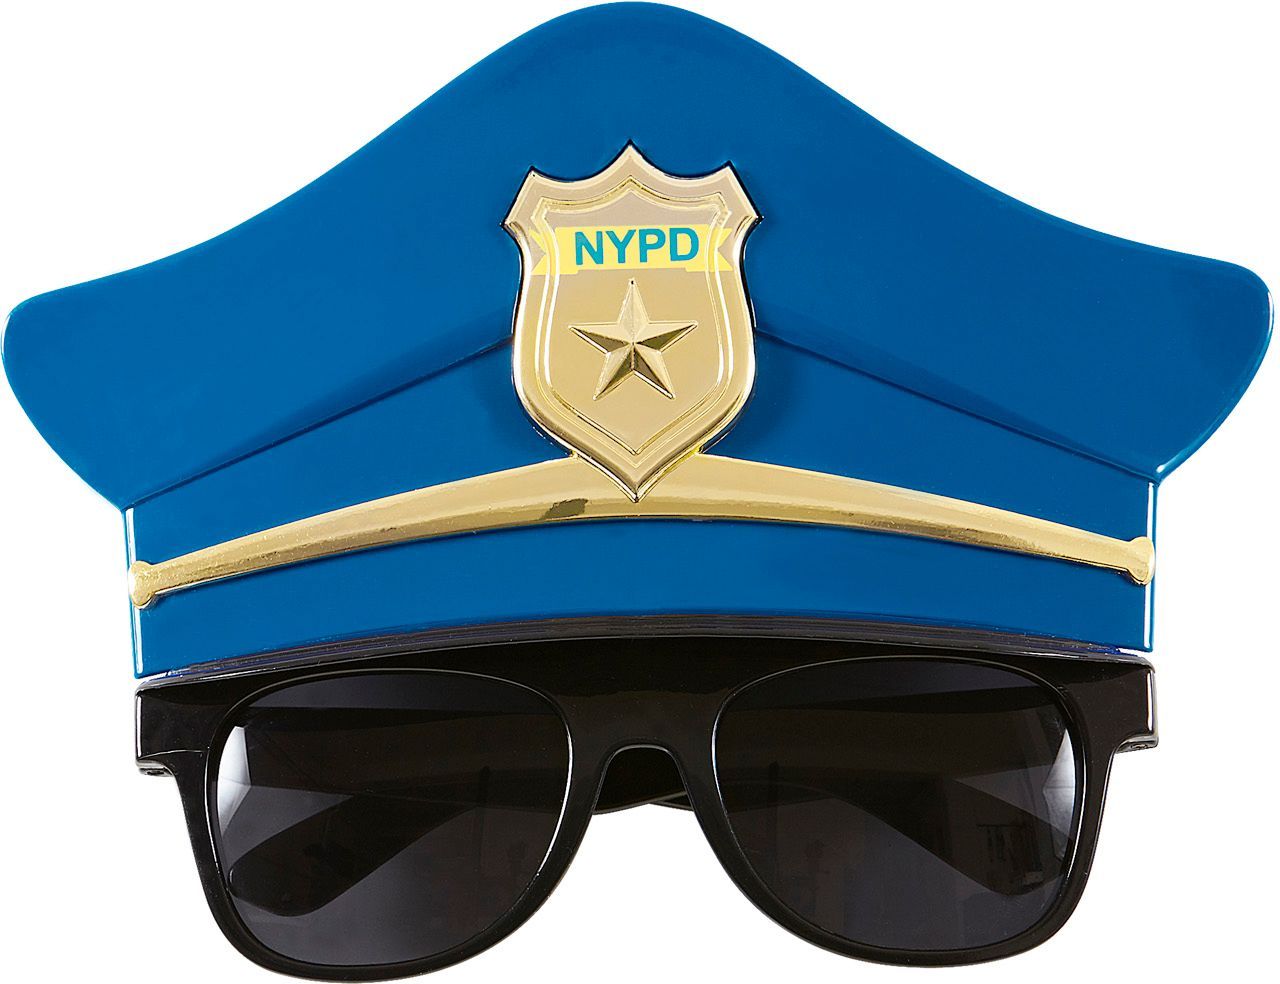 NYPD bril